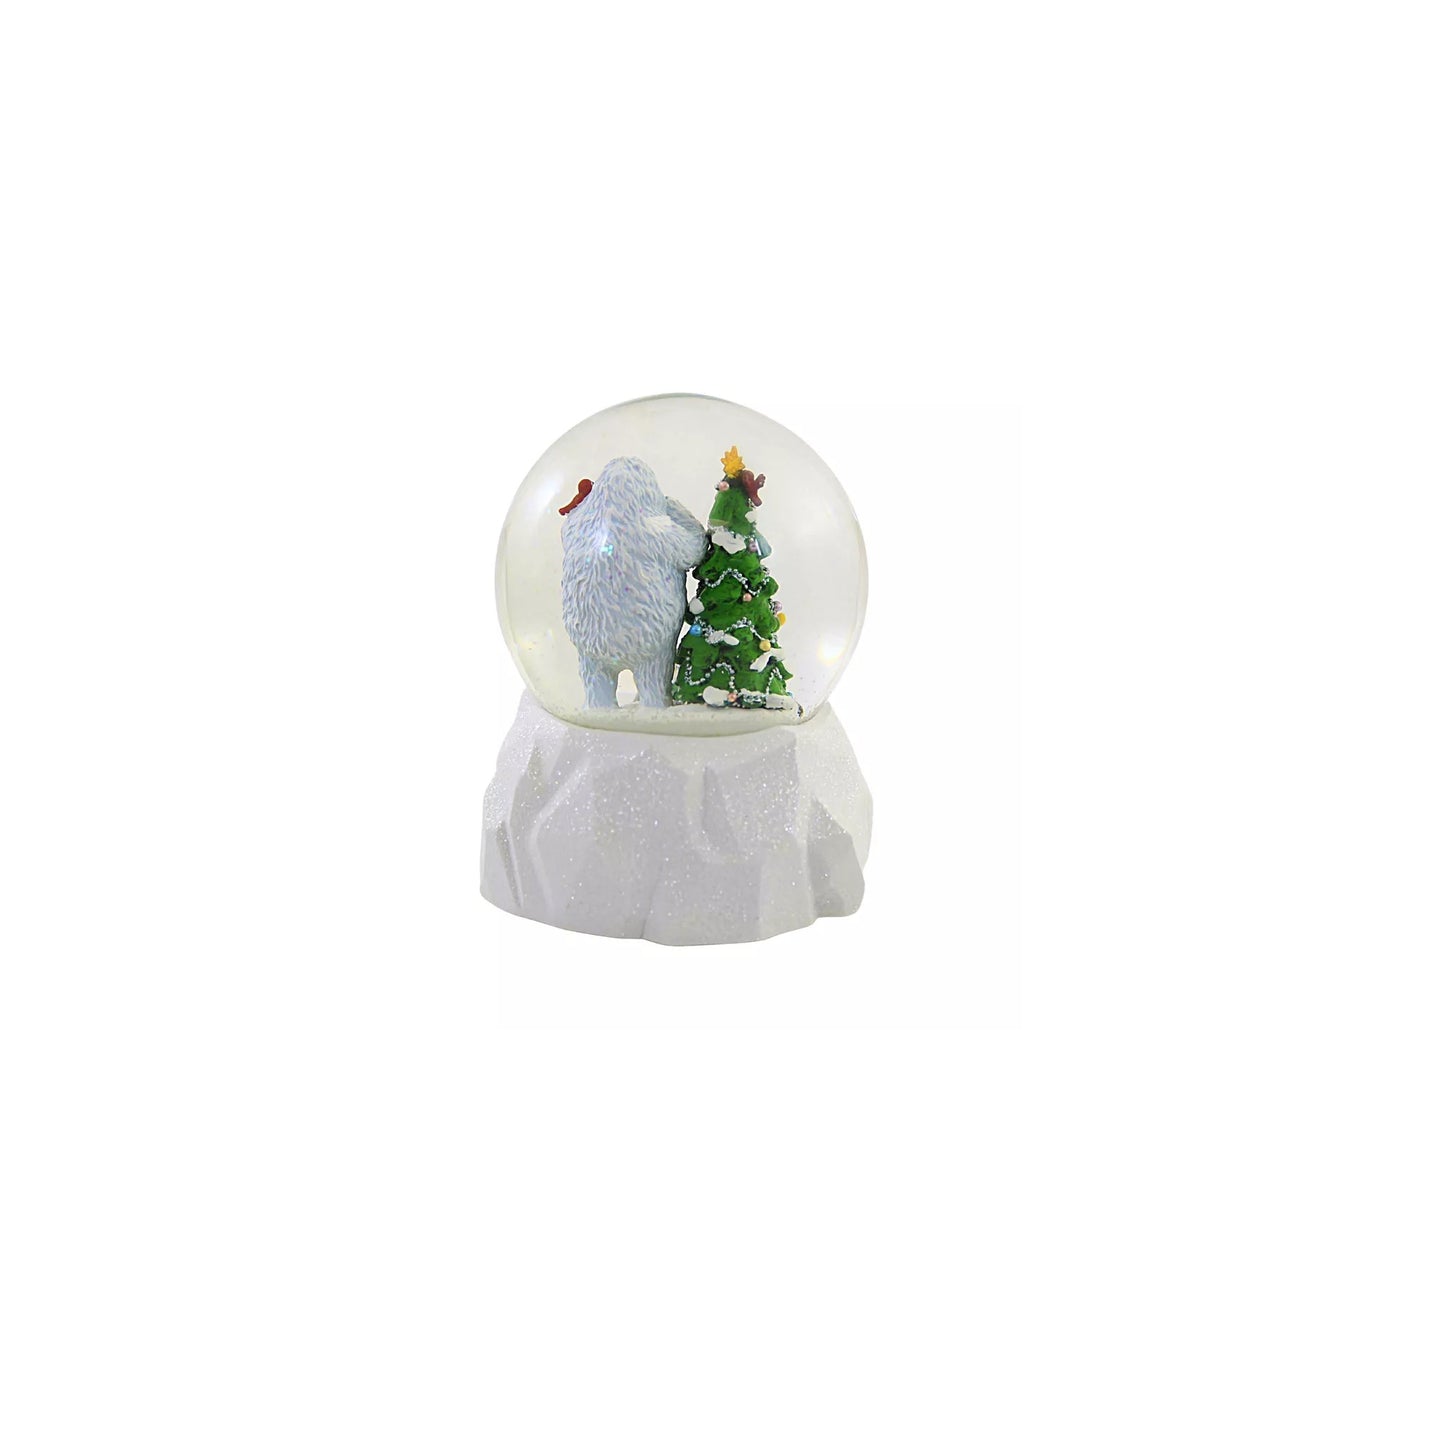 Roman 5.75" Musical LED Rudolph & Friends Dome